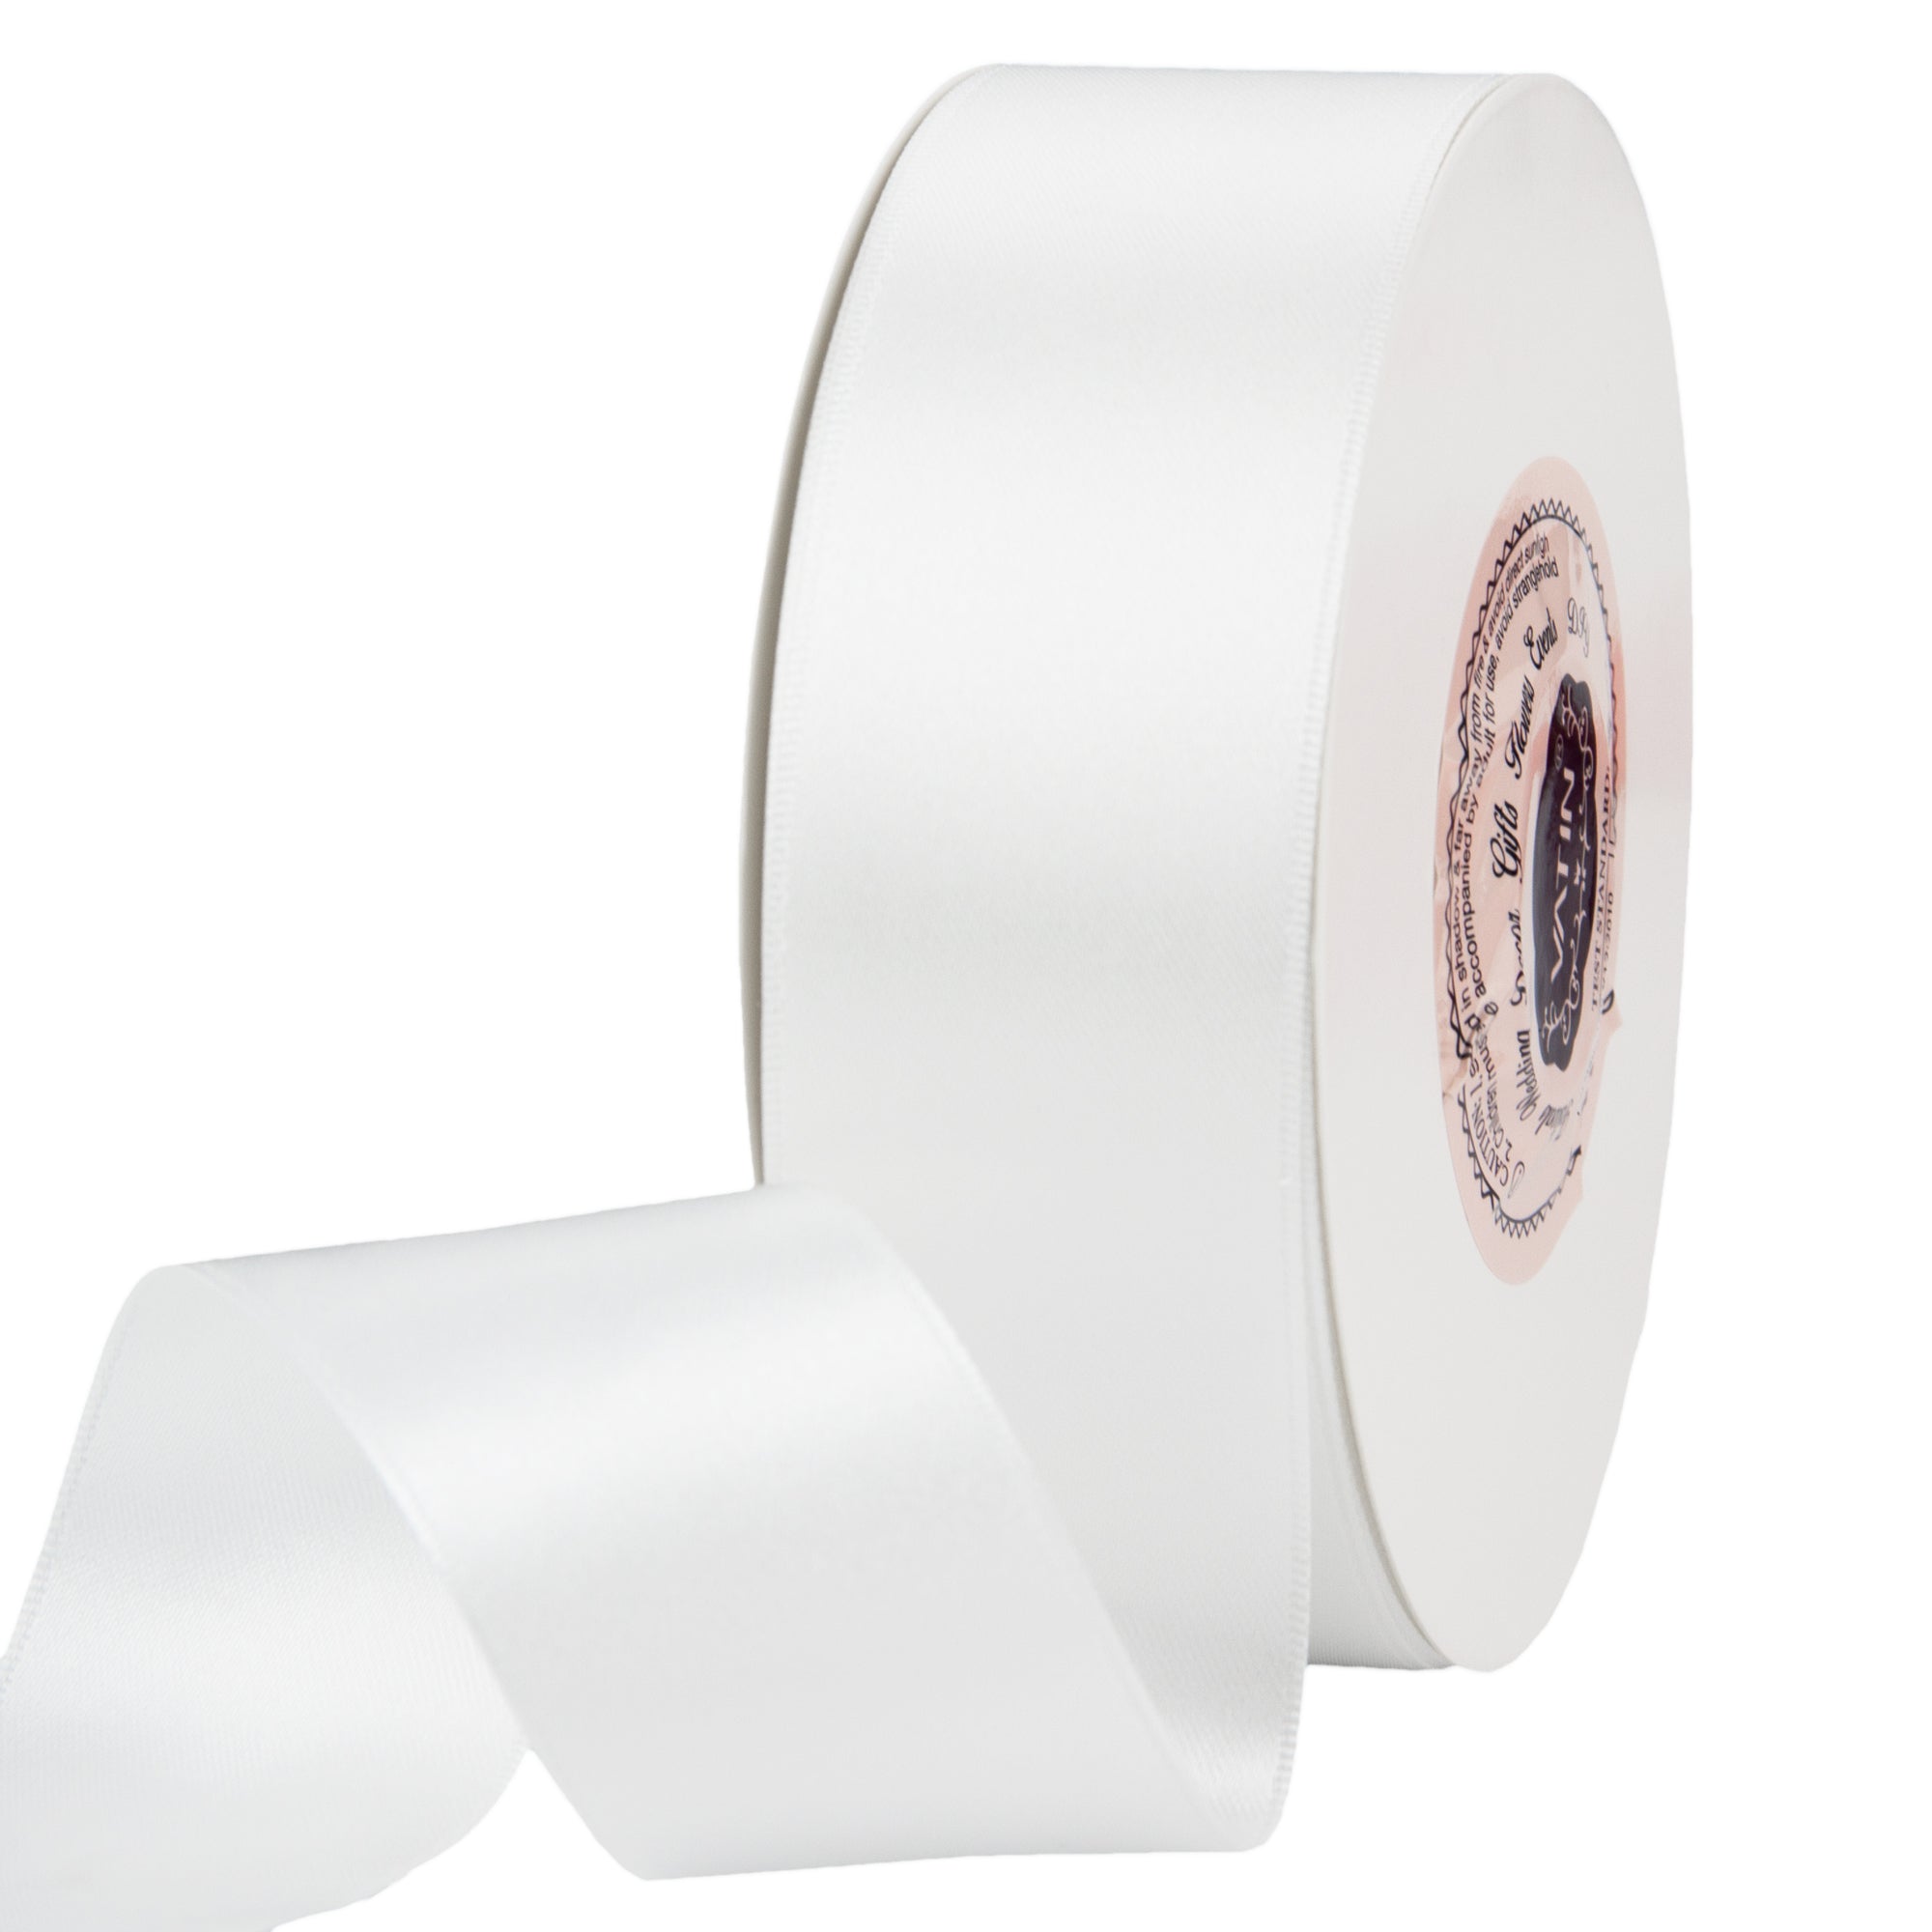 ROLL OF 2 YARDS,6 INCHES OF WHITE DOUBLE SIDED SATIN RIBBON 1 1/2 WIDE NEW